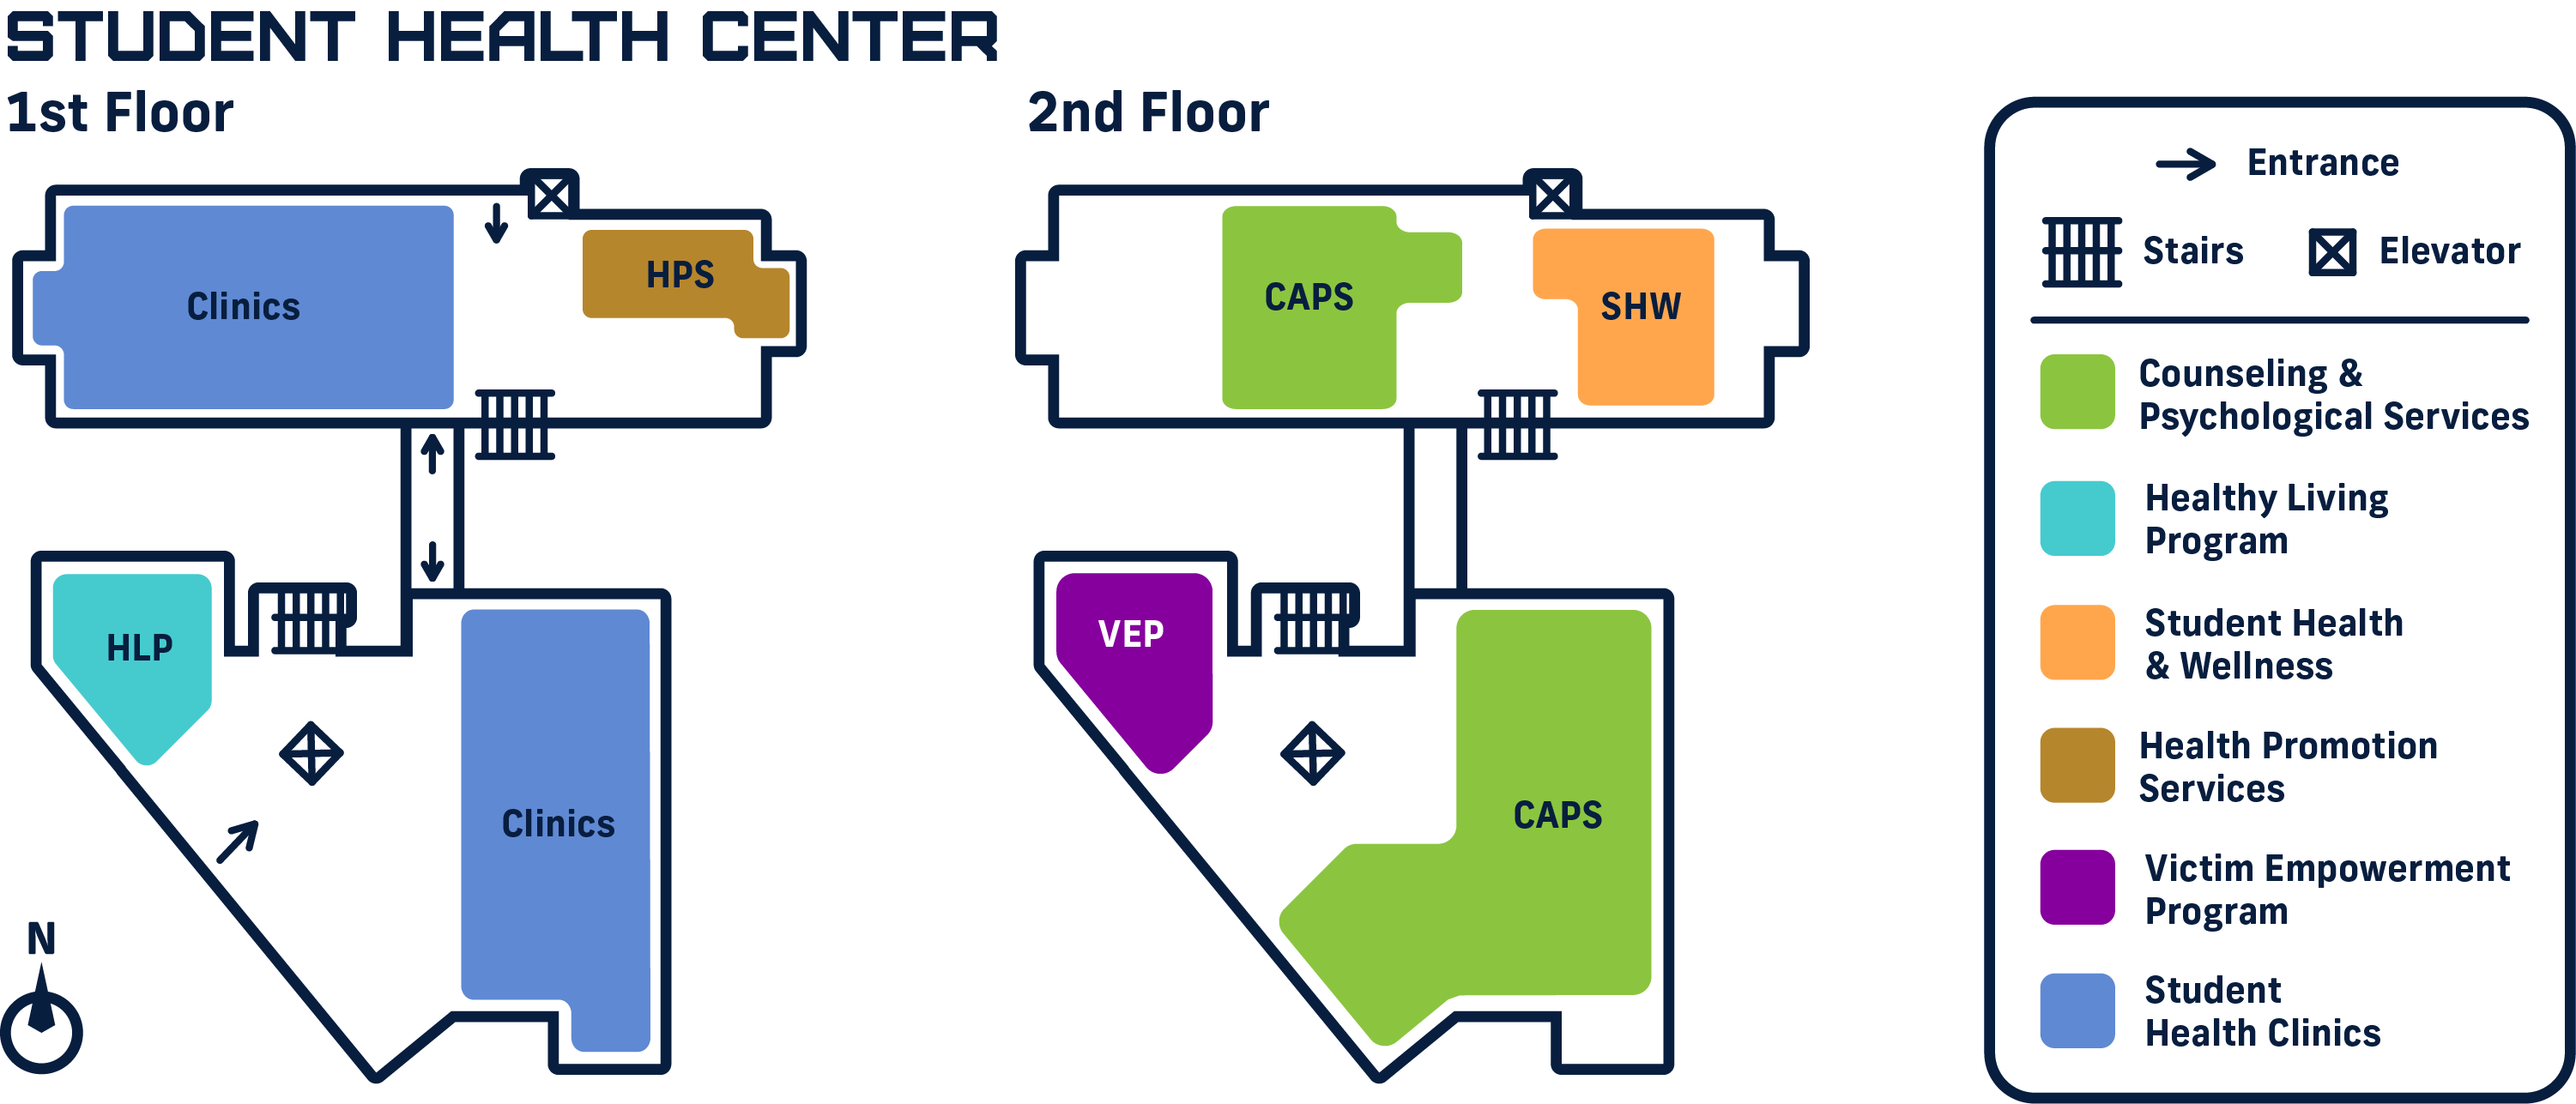 Map of the Student Health Center at MMC